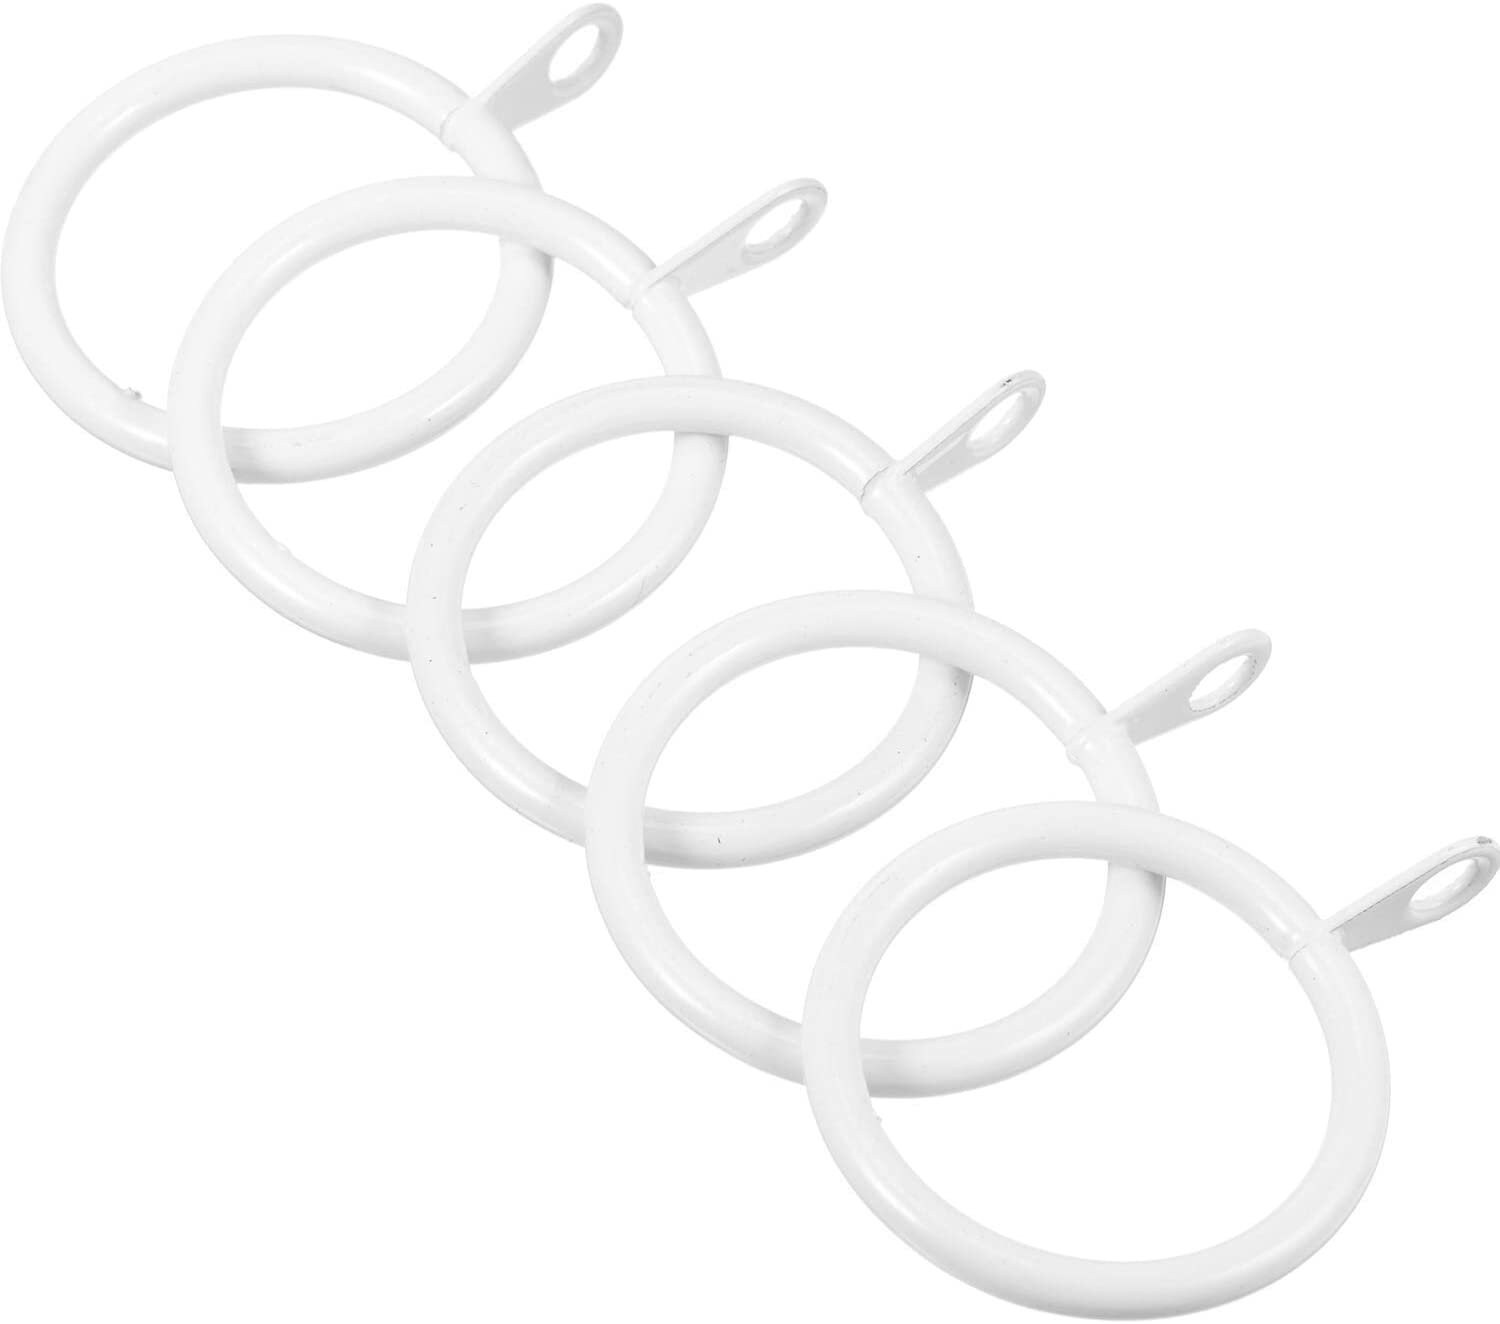 White 40MM Metal Curtain Rings with eyelets Heavy Duty in Curtain Pole Voile. 